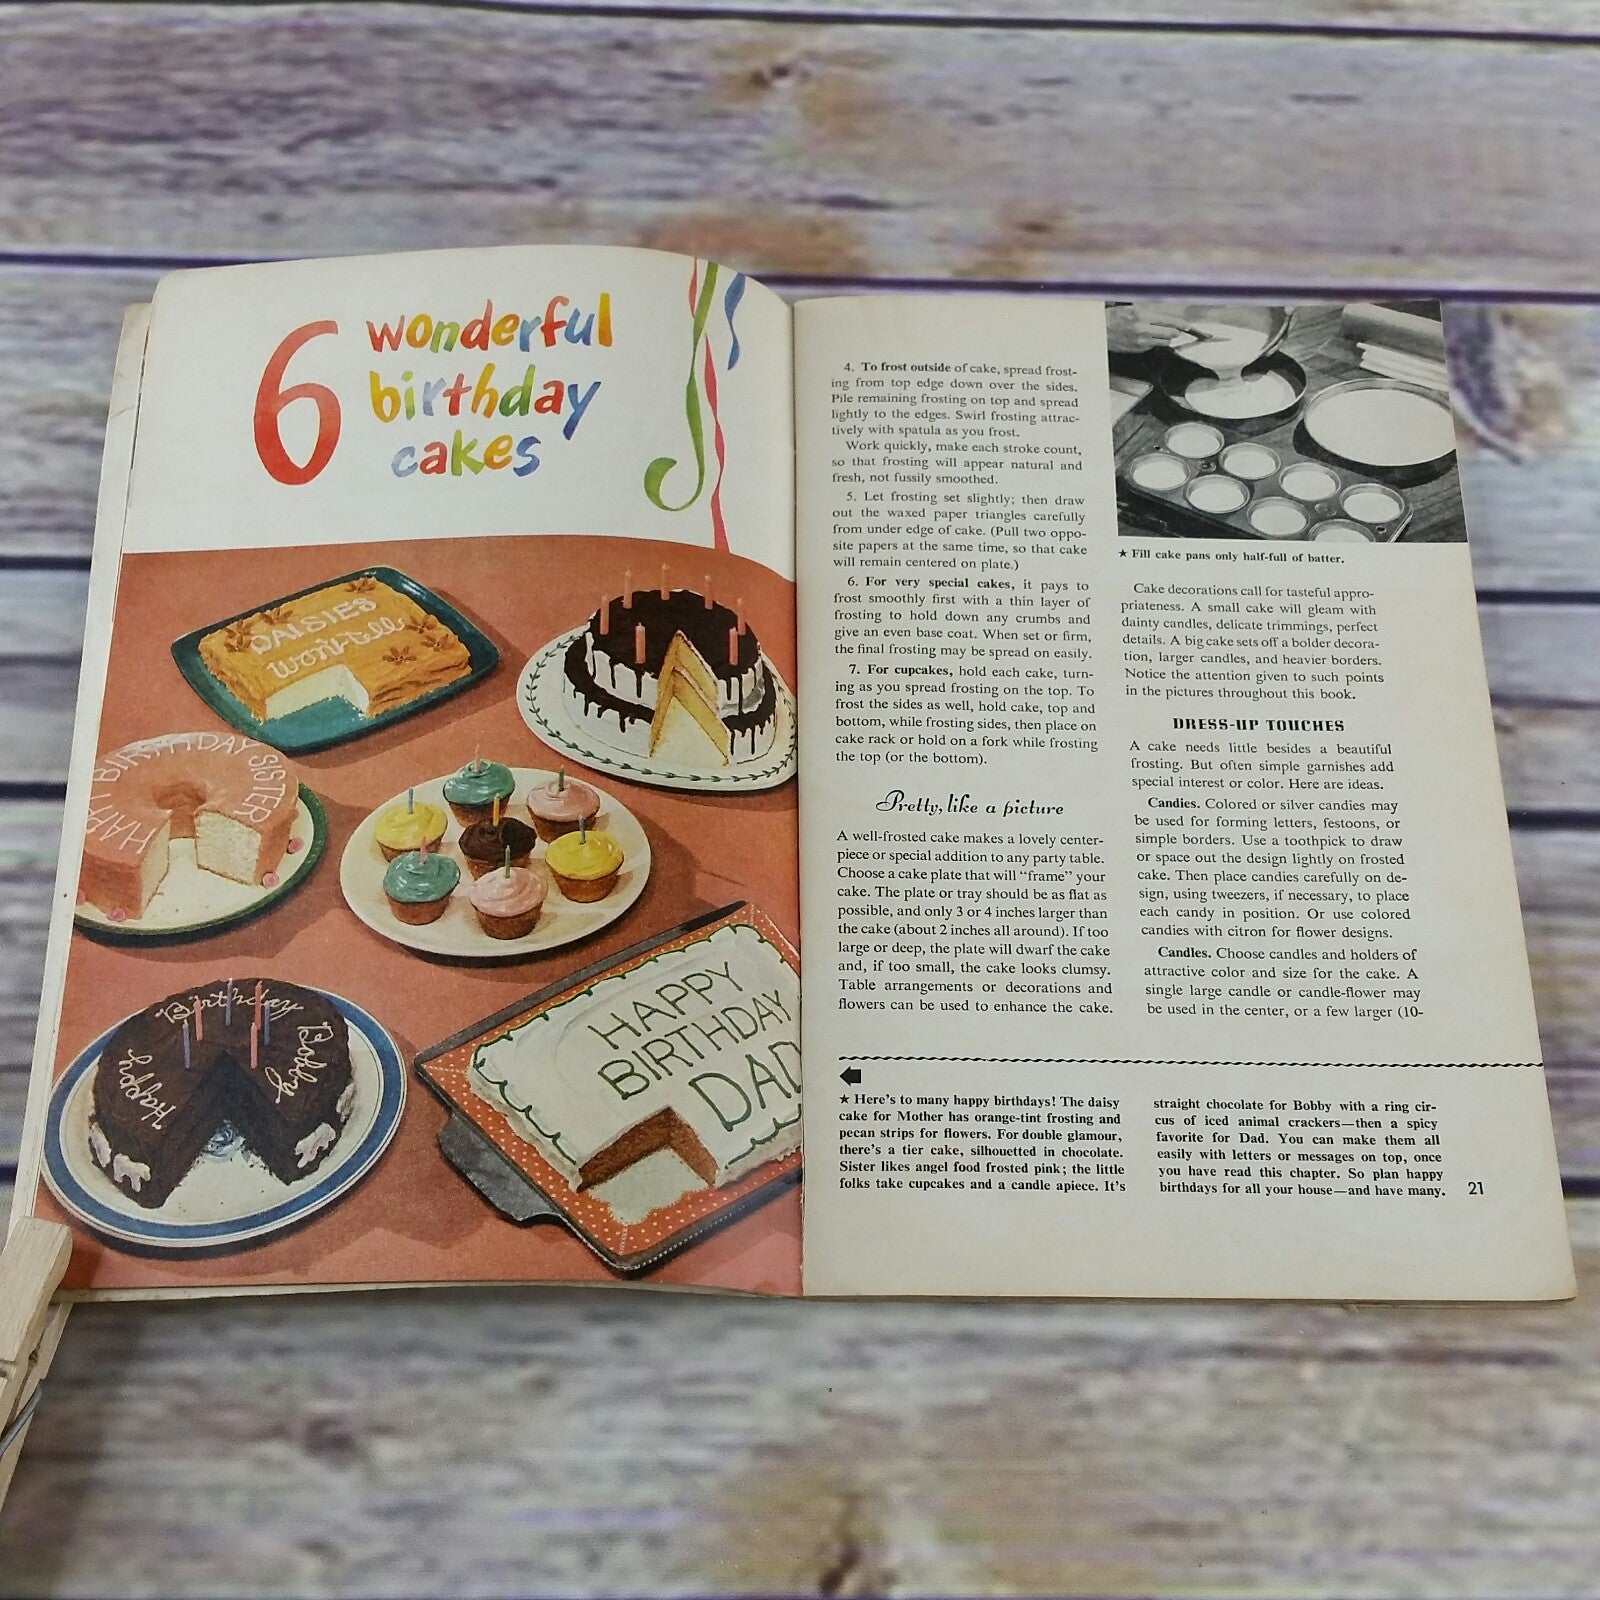 Vintage Cookbook Learn to Bake You'll Love It 1947 General Foods Swans Down Calumet Baker's Chocolate Promo Recipes - At Grandma's Table